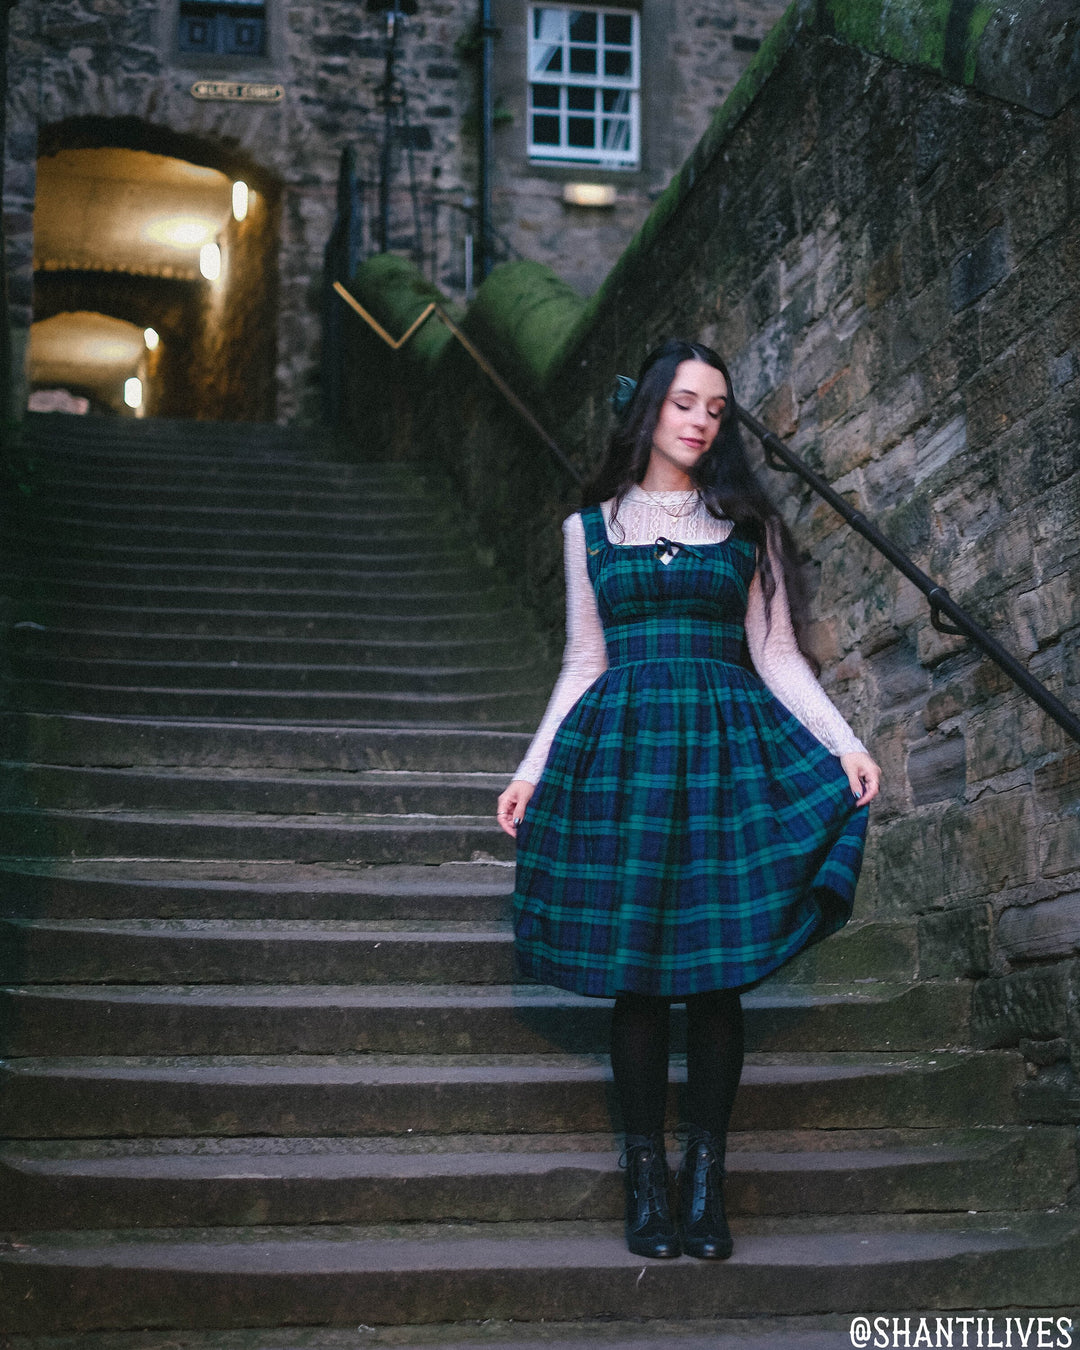 MTO - Michelle Dress Green "You Plaid me at Hello"